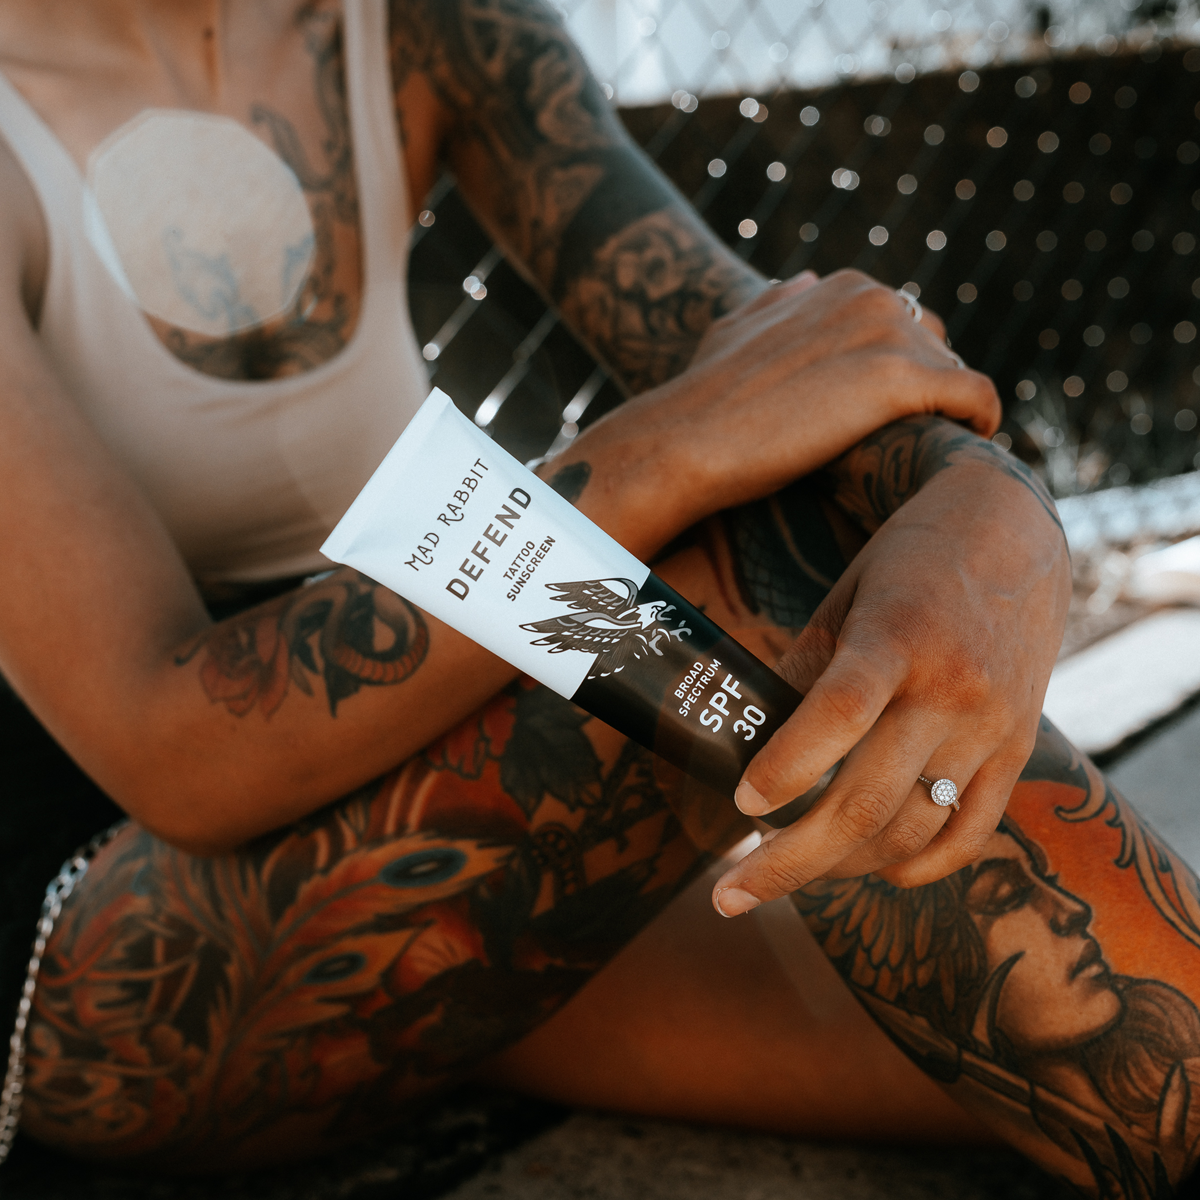 How Does Tanning Affect Tattoos Tanning  Tattoos in 2021  SPY